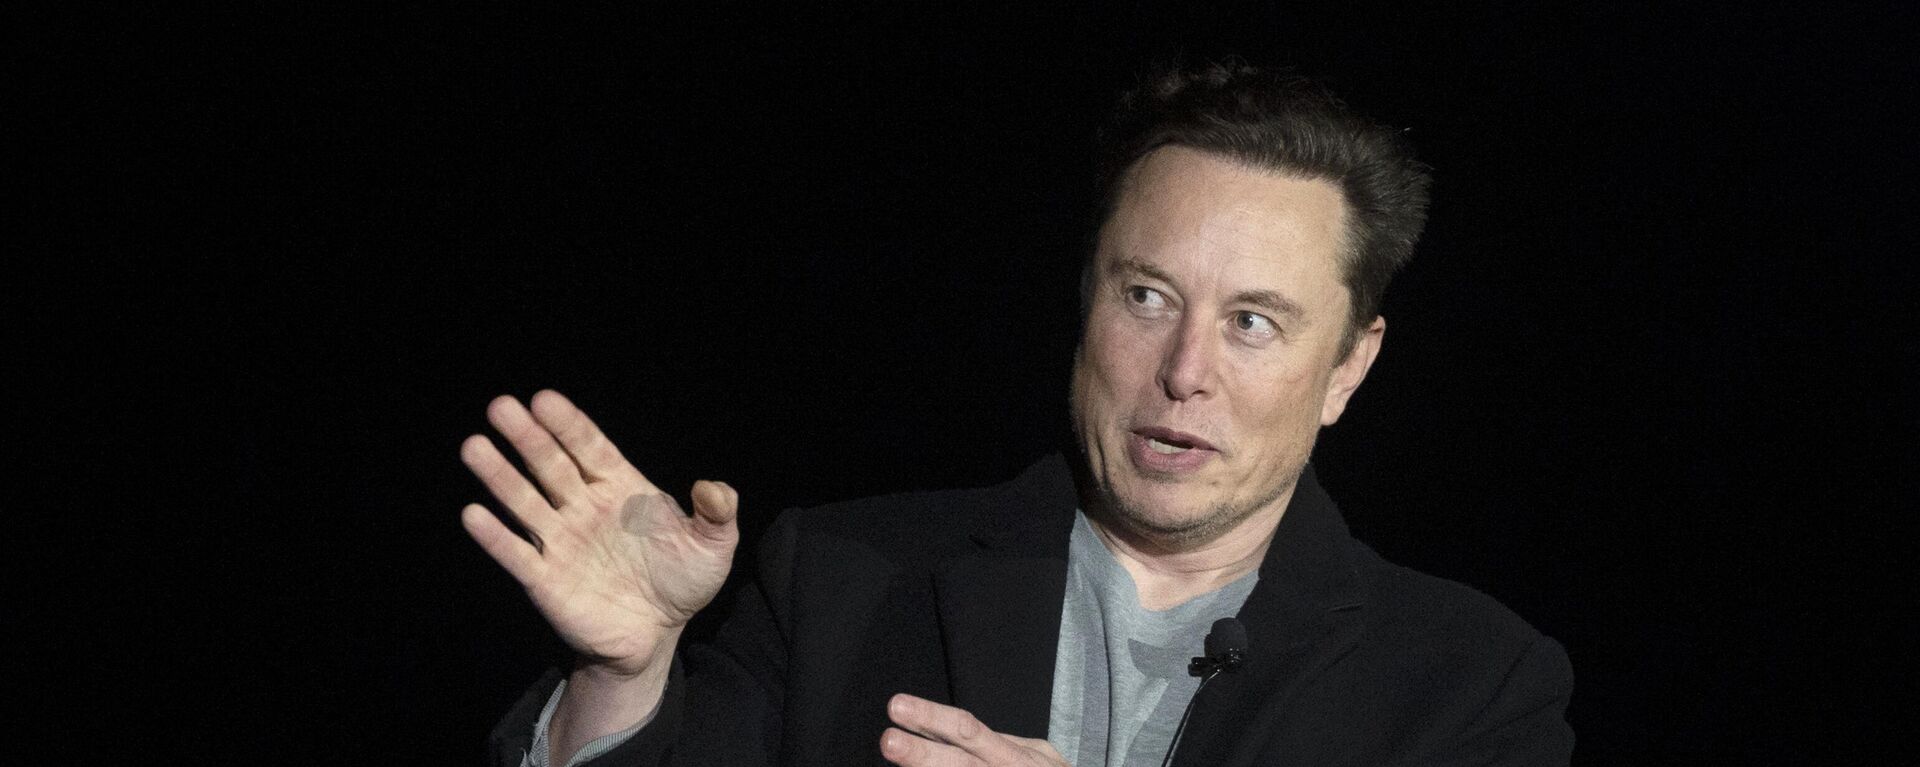 Elon Musk gestures as he speaks during a press conference at SpaceX's Starbase facility near Boca Chica Village in South Texas, on February 10, 2022. - Sputnik International, 1920, 17.01.2023